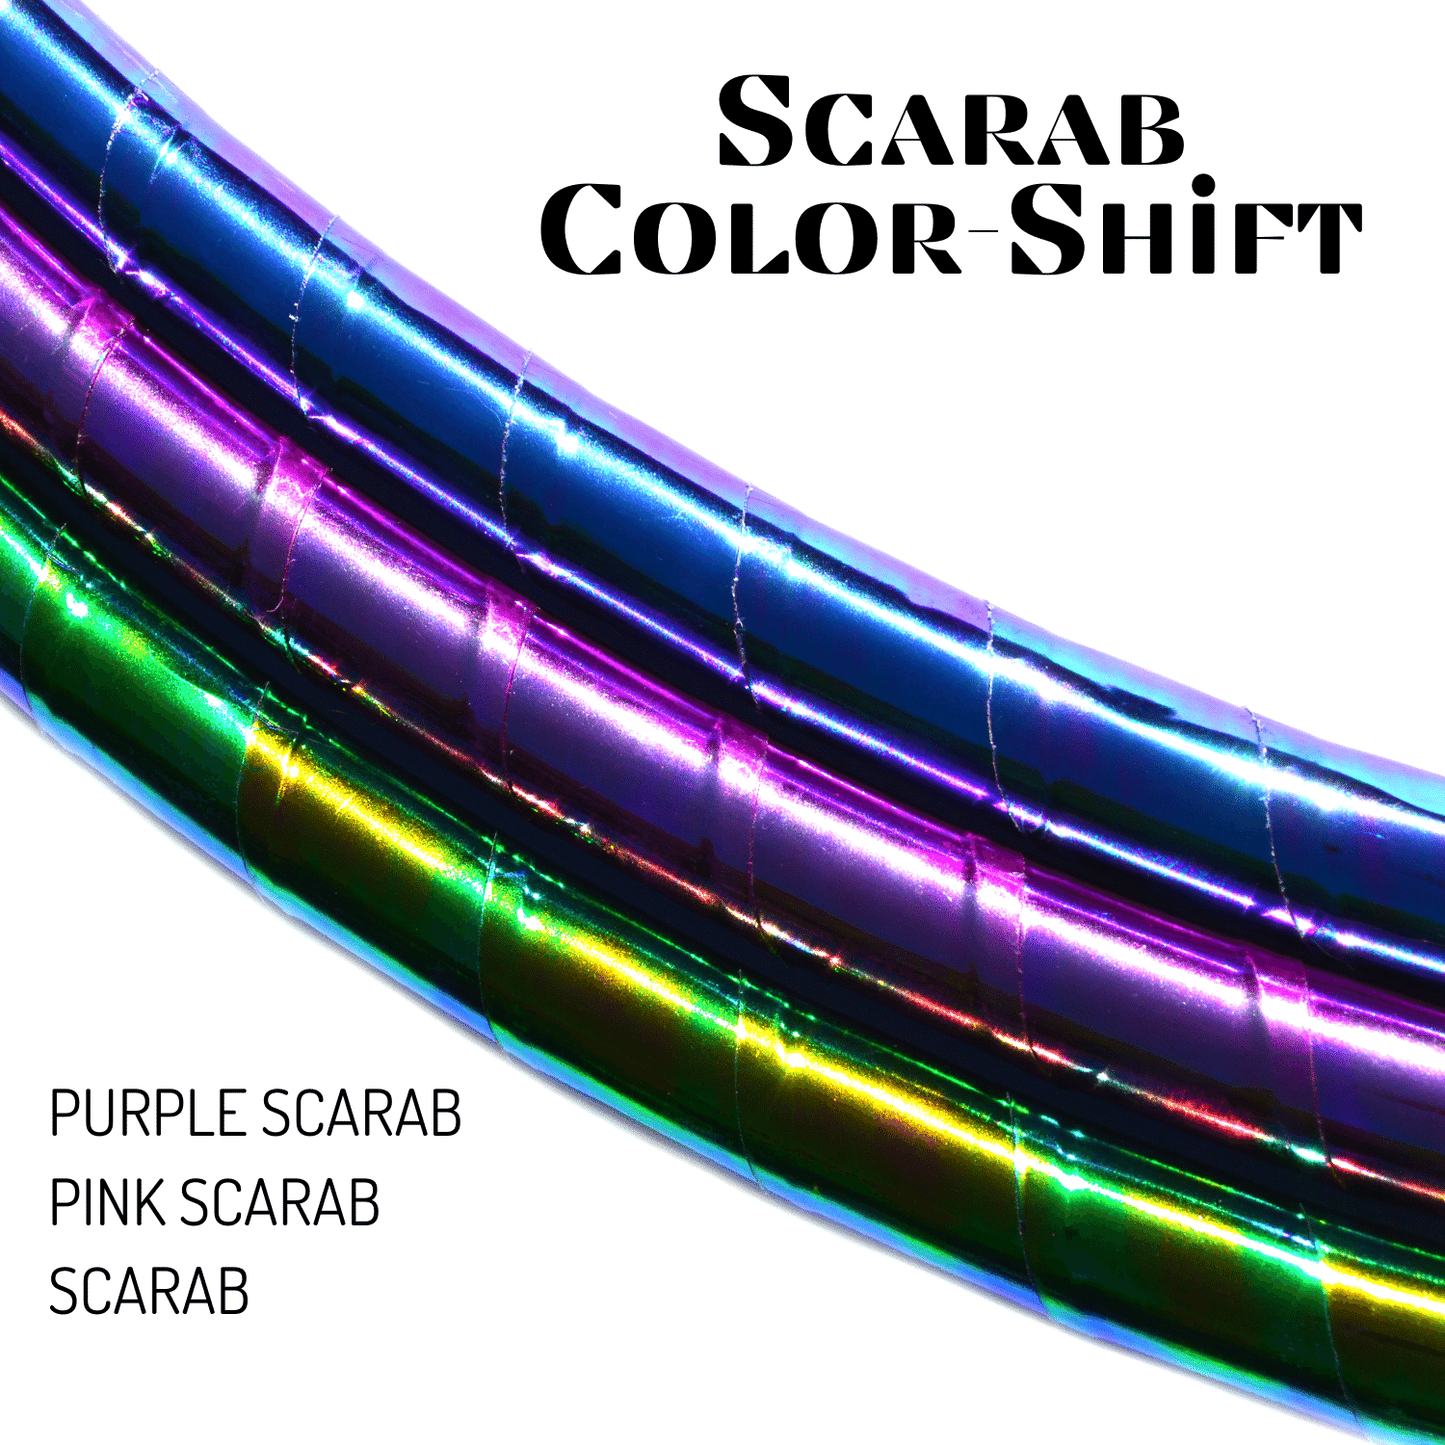 Scarab Color-Shift Performance Taped Hoops